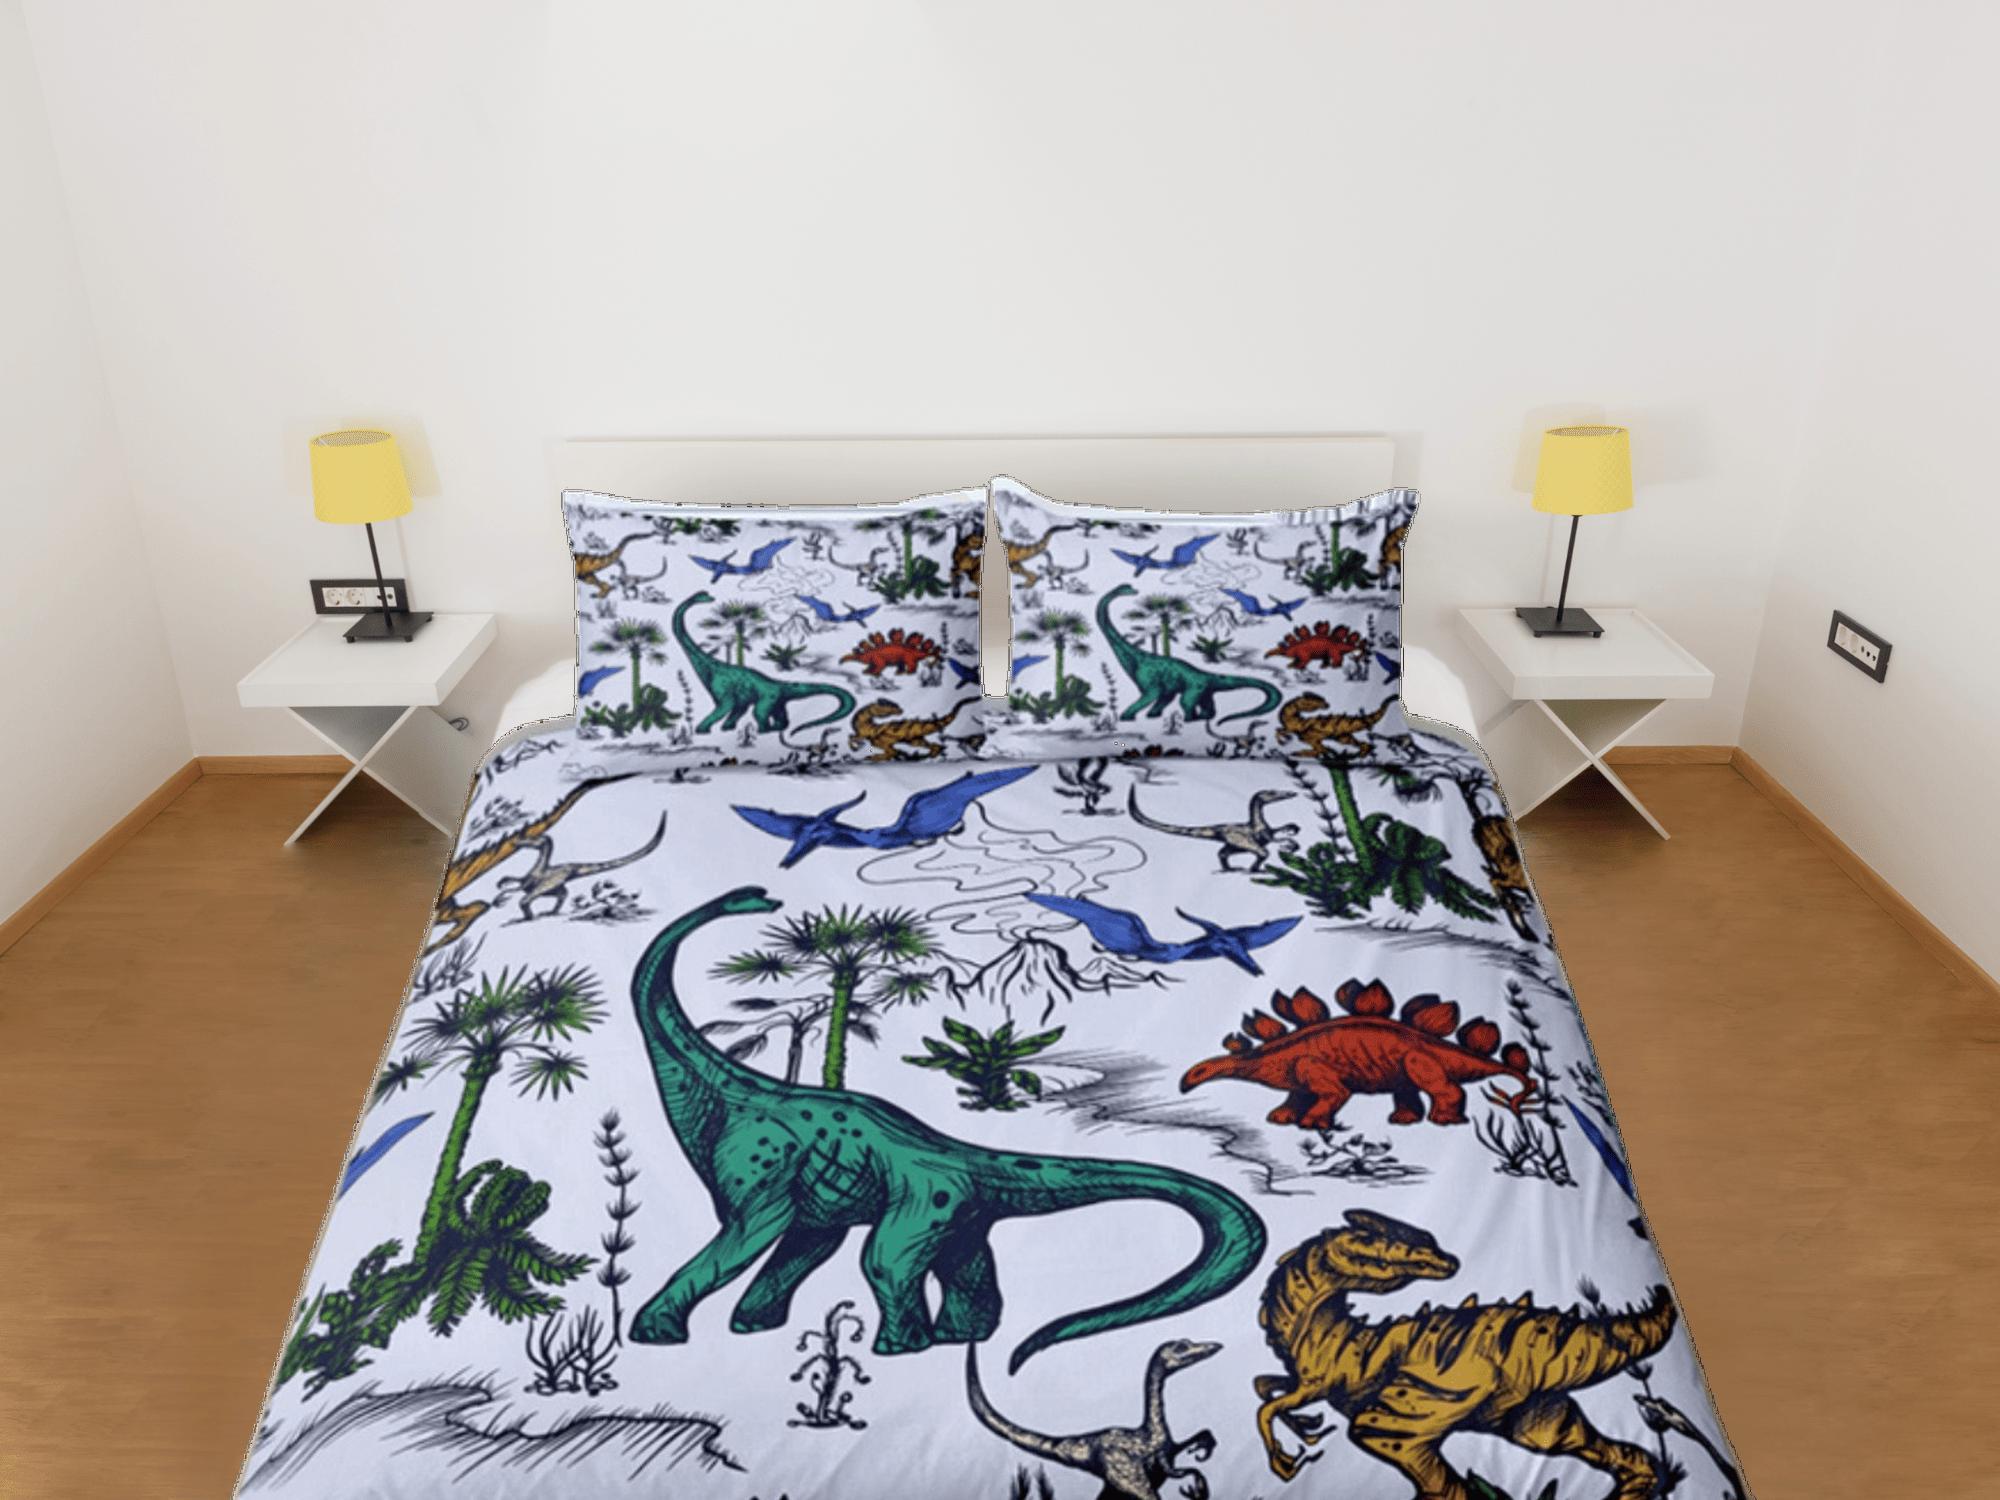 daintyduvet Colorful Dinosaurs Duvet Cover Set Cute Bedspread, Dorm Bedding with Pillowcase